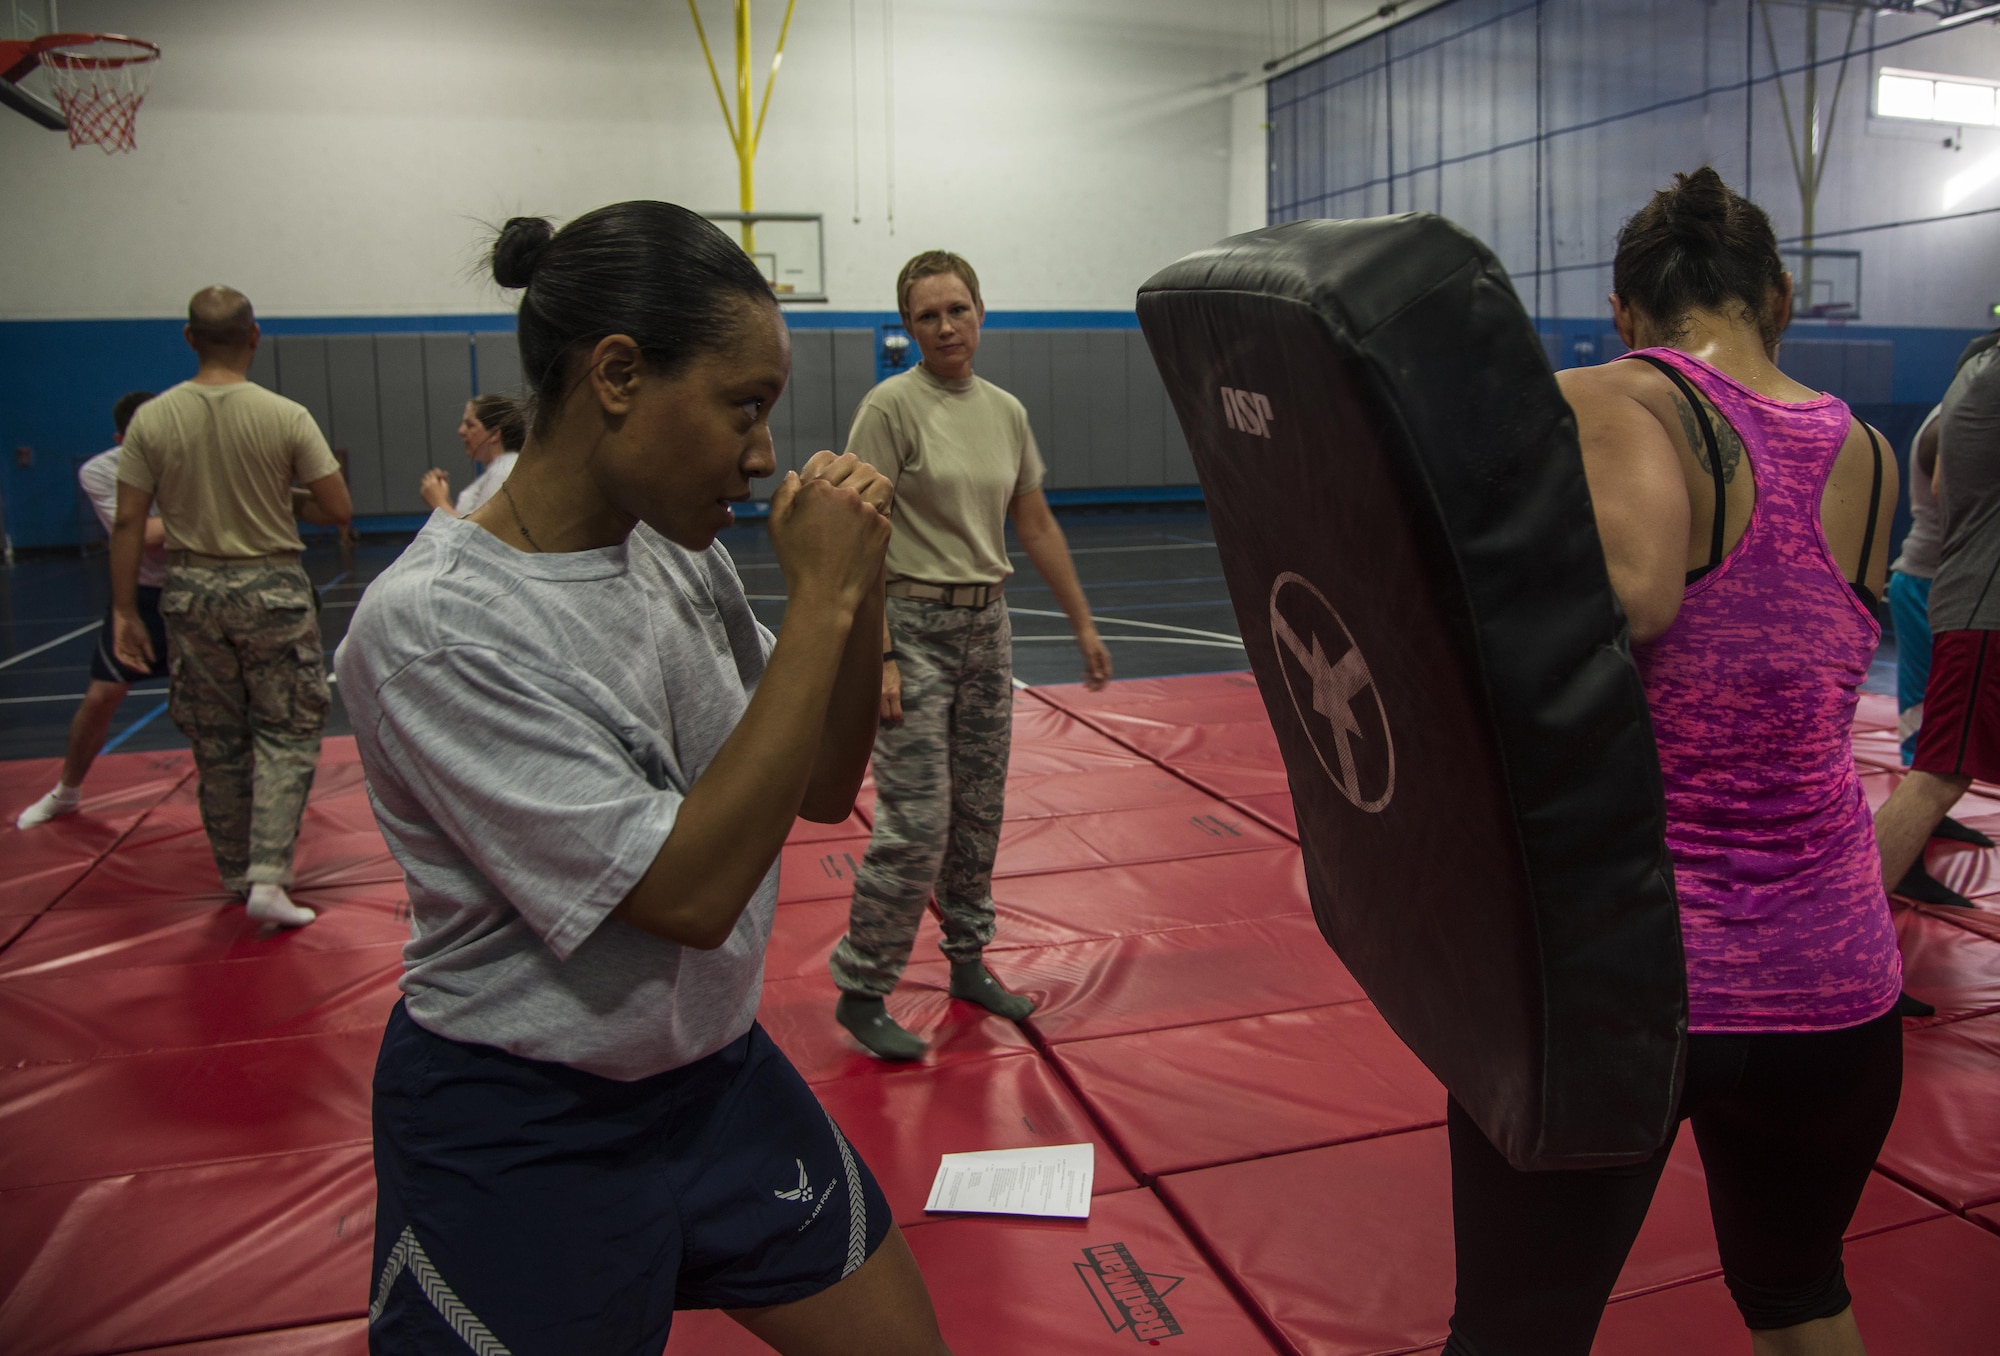 Master Sgt. Adrianne Smith, 379th Air Expeditionary Wing command post superintendent, positions herself to throw some jabs during a combatives class at the Blanchard-Preston Complex gym May 29, 2015 at Al Udeid Air Base, Qatar. Bi-weekly, Airmen of the 379th Expeditionary Security Forces Squadron instruct members on non-lethal ways to defend themselves. (U.S. Air Force photo byTech. Sgt. Rasheen Douglas)